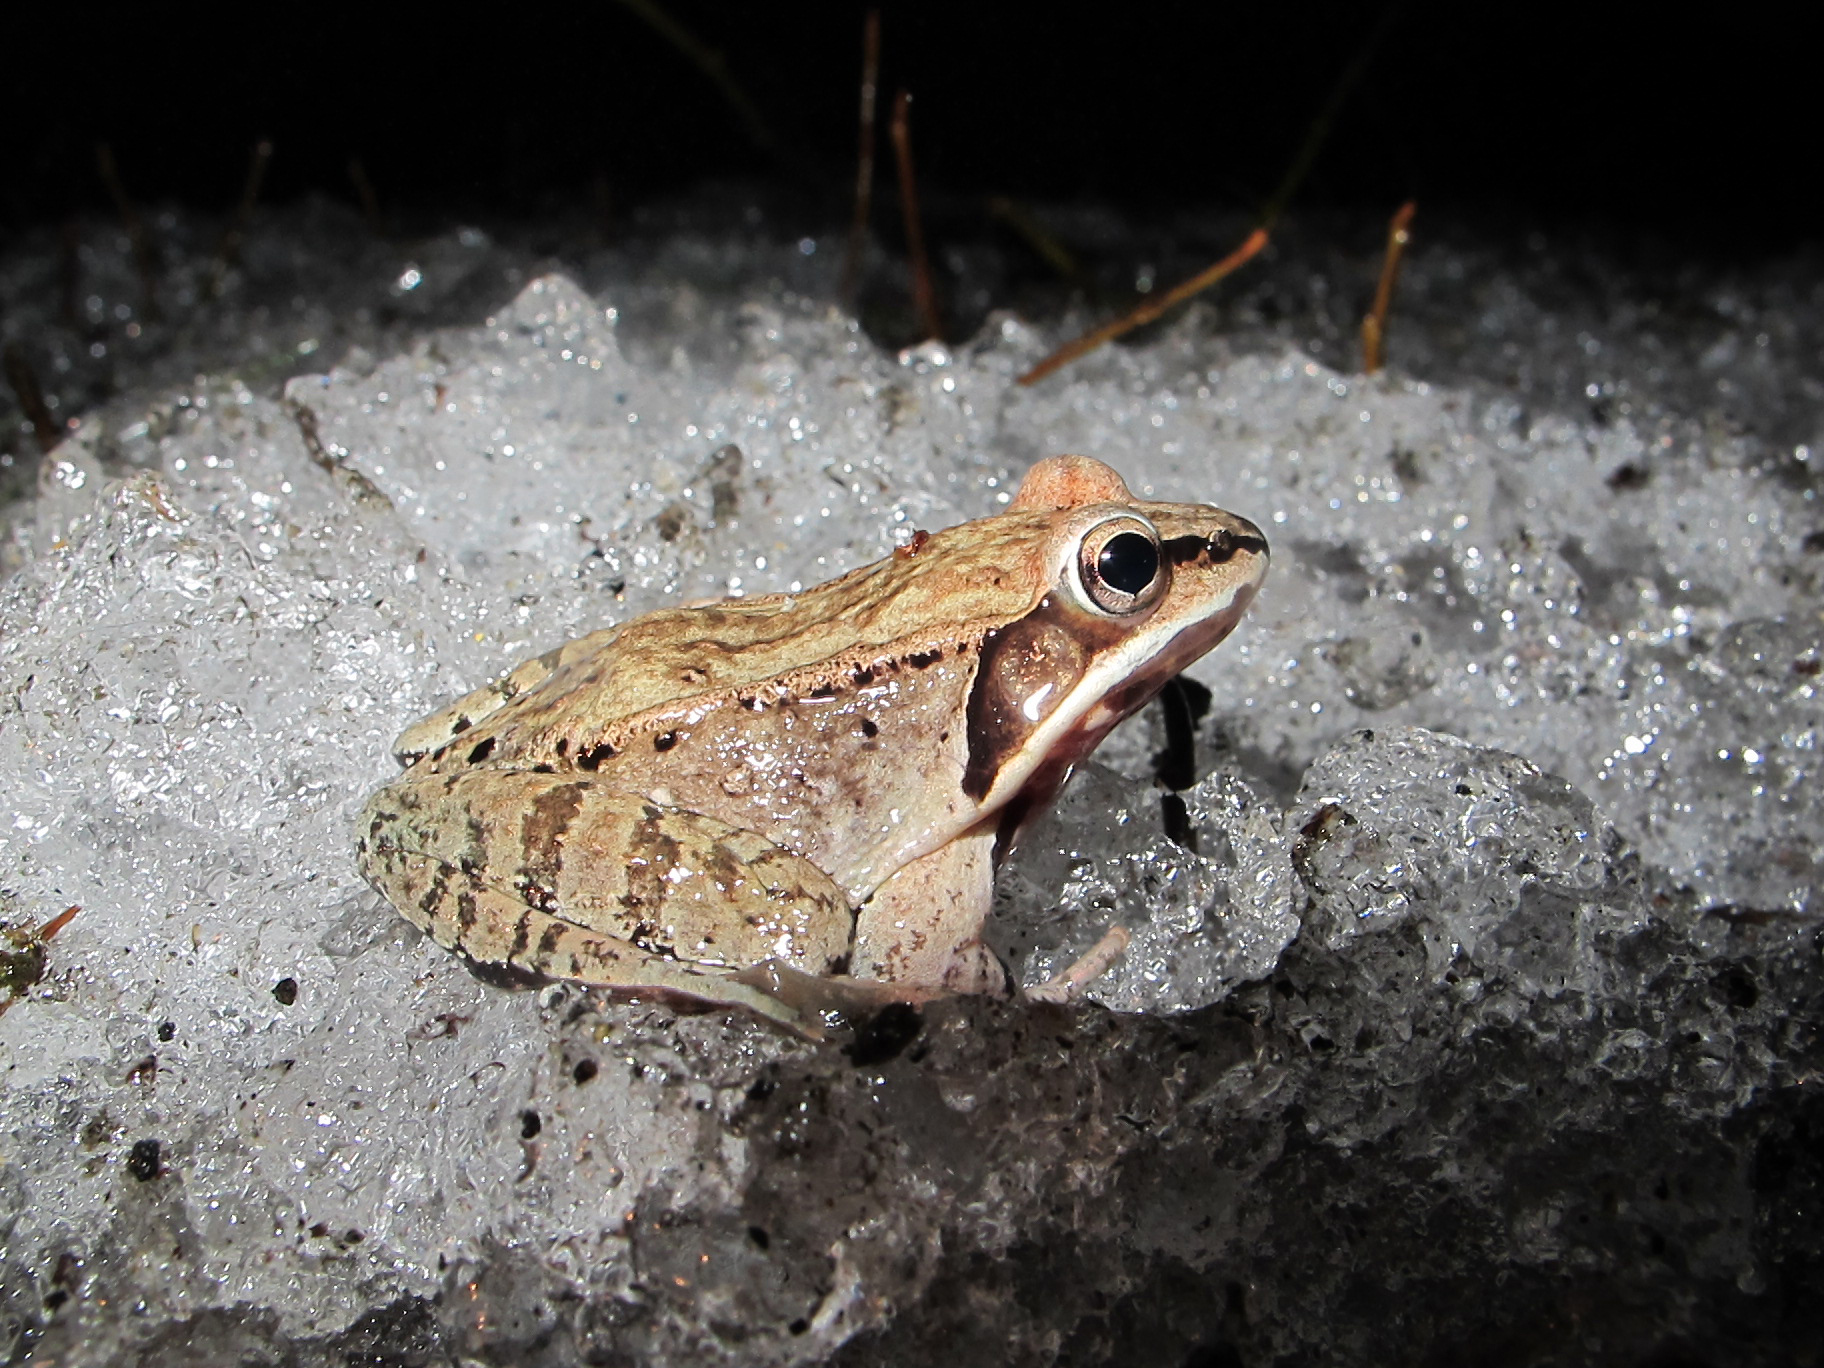 A close up of a wood frog in North America